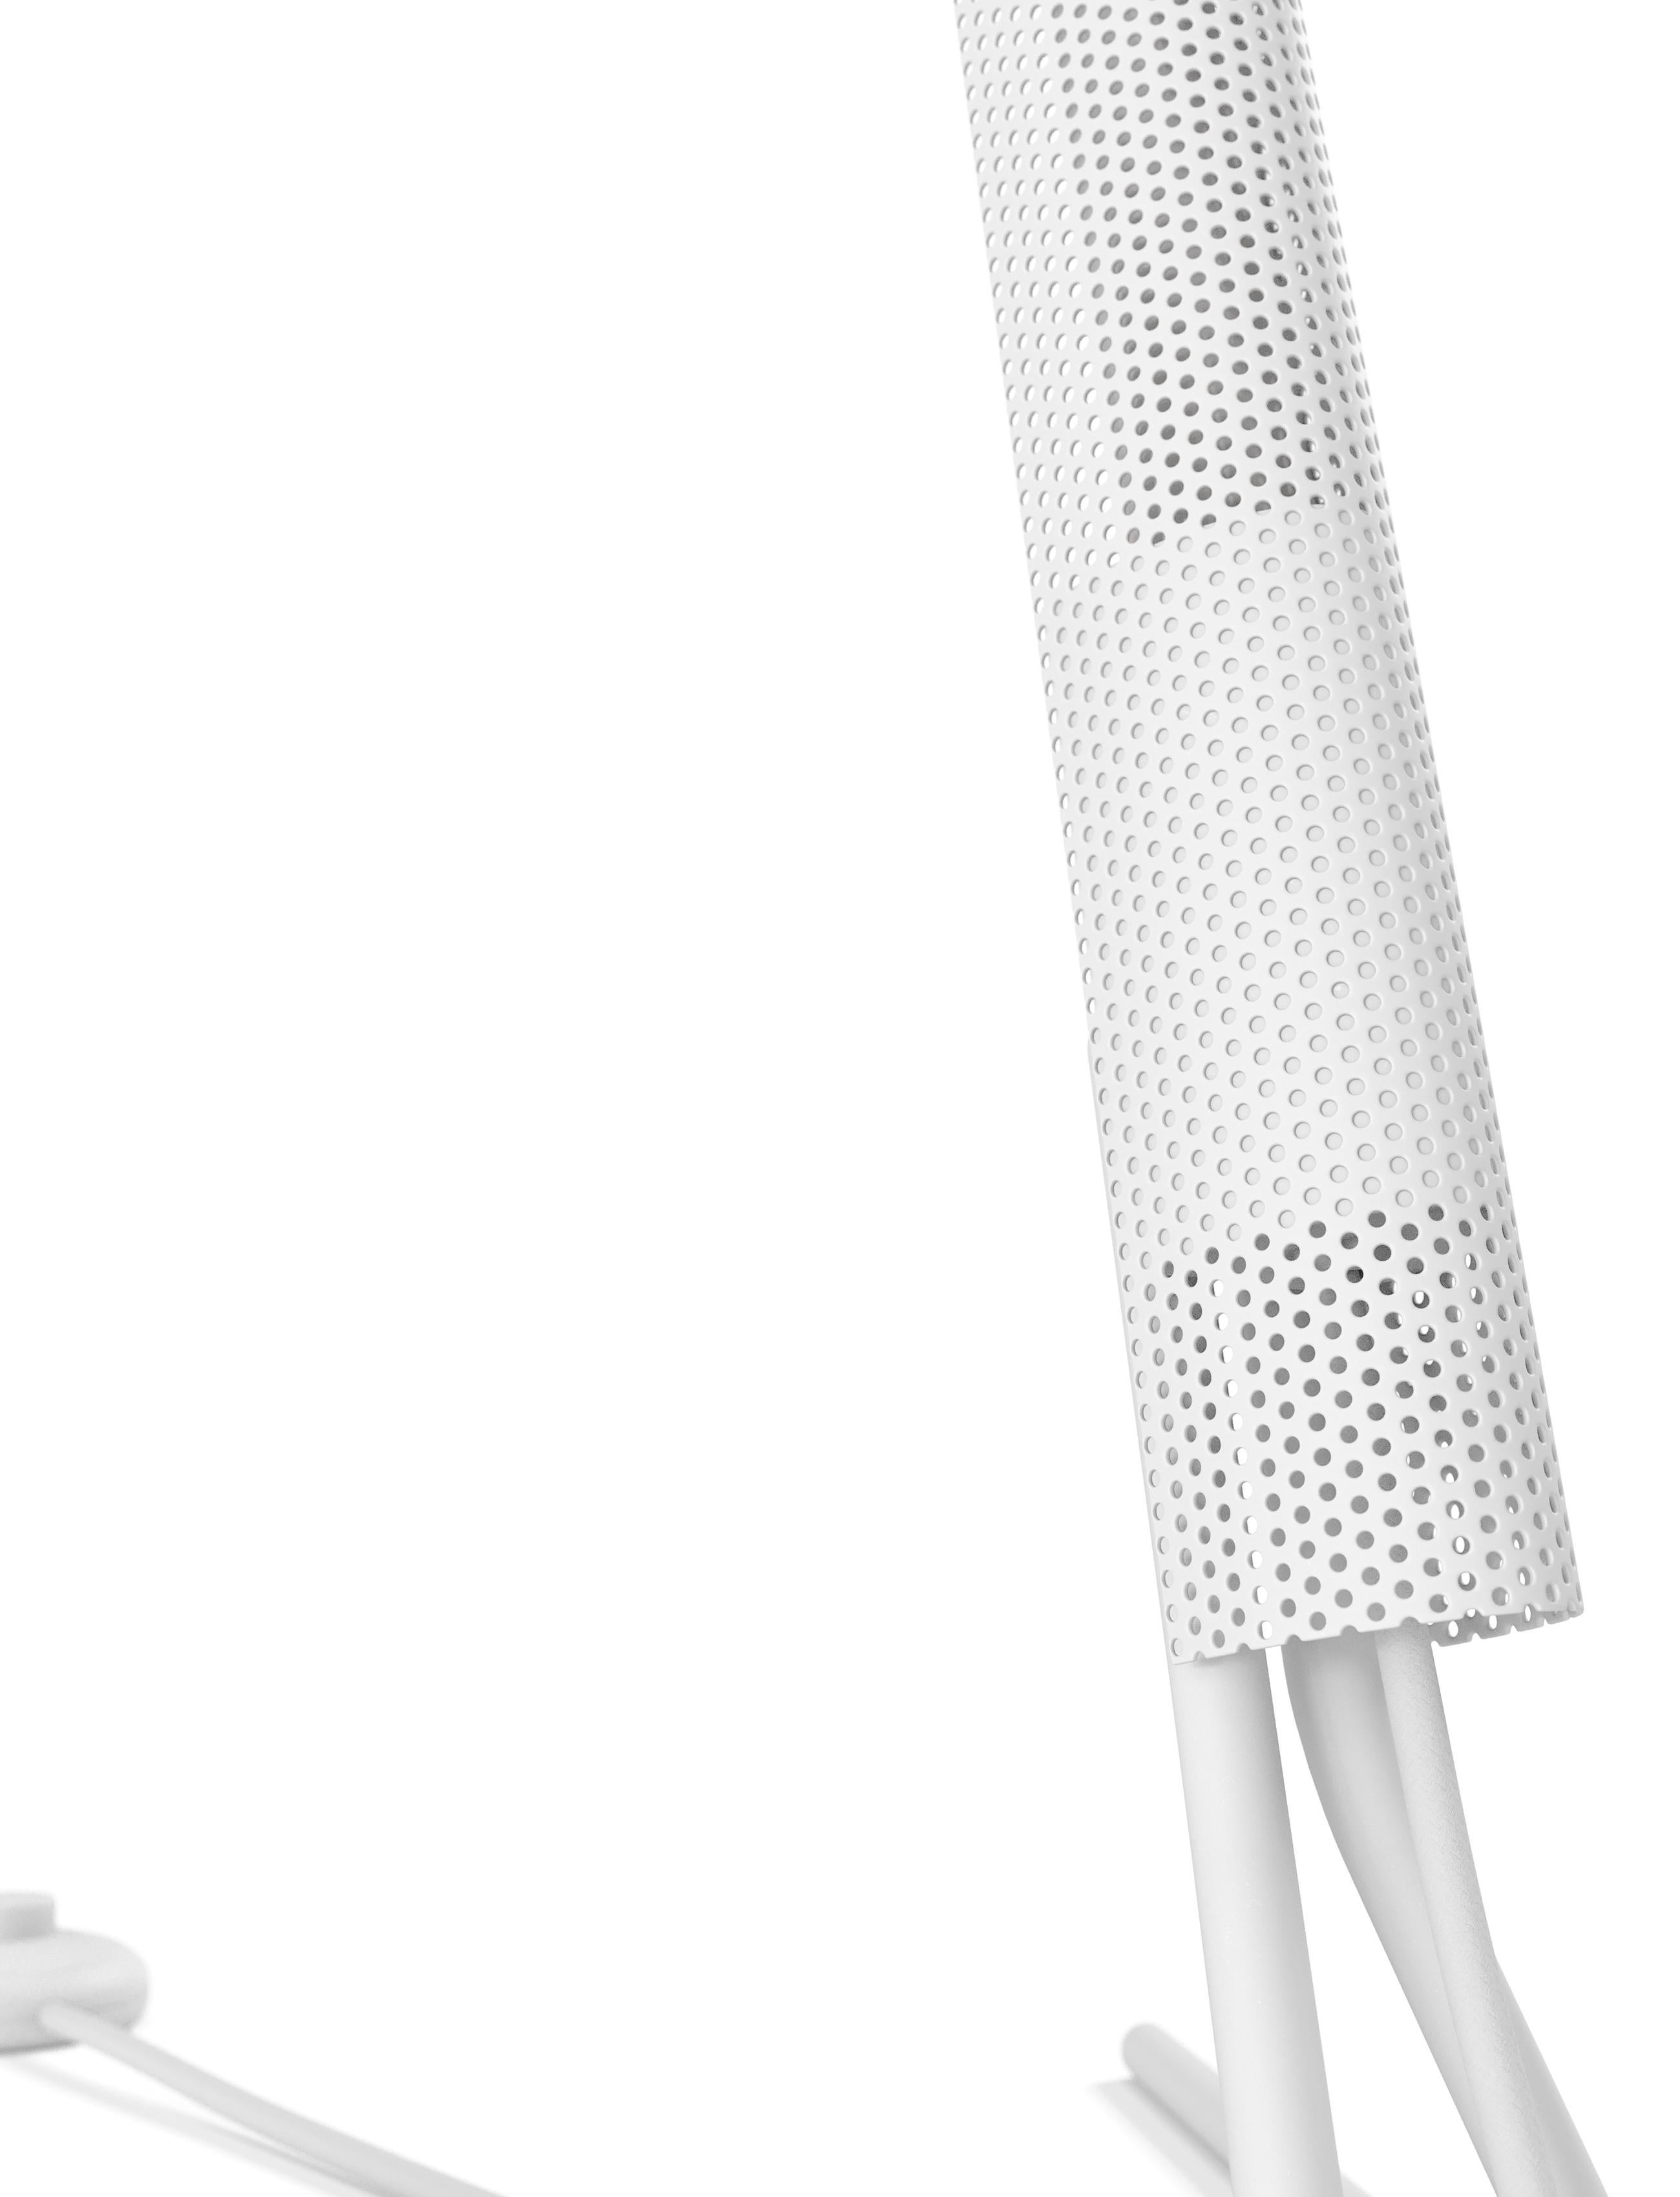 Powder-Coated Radent Floor Lamp in White by Nuad For Sale